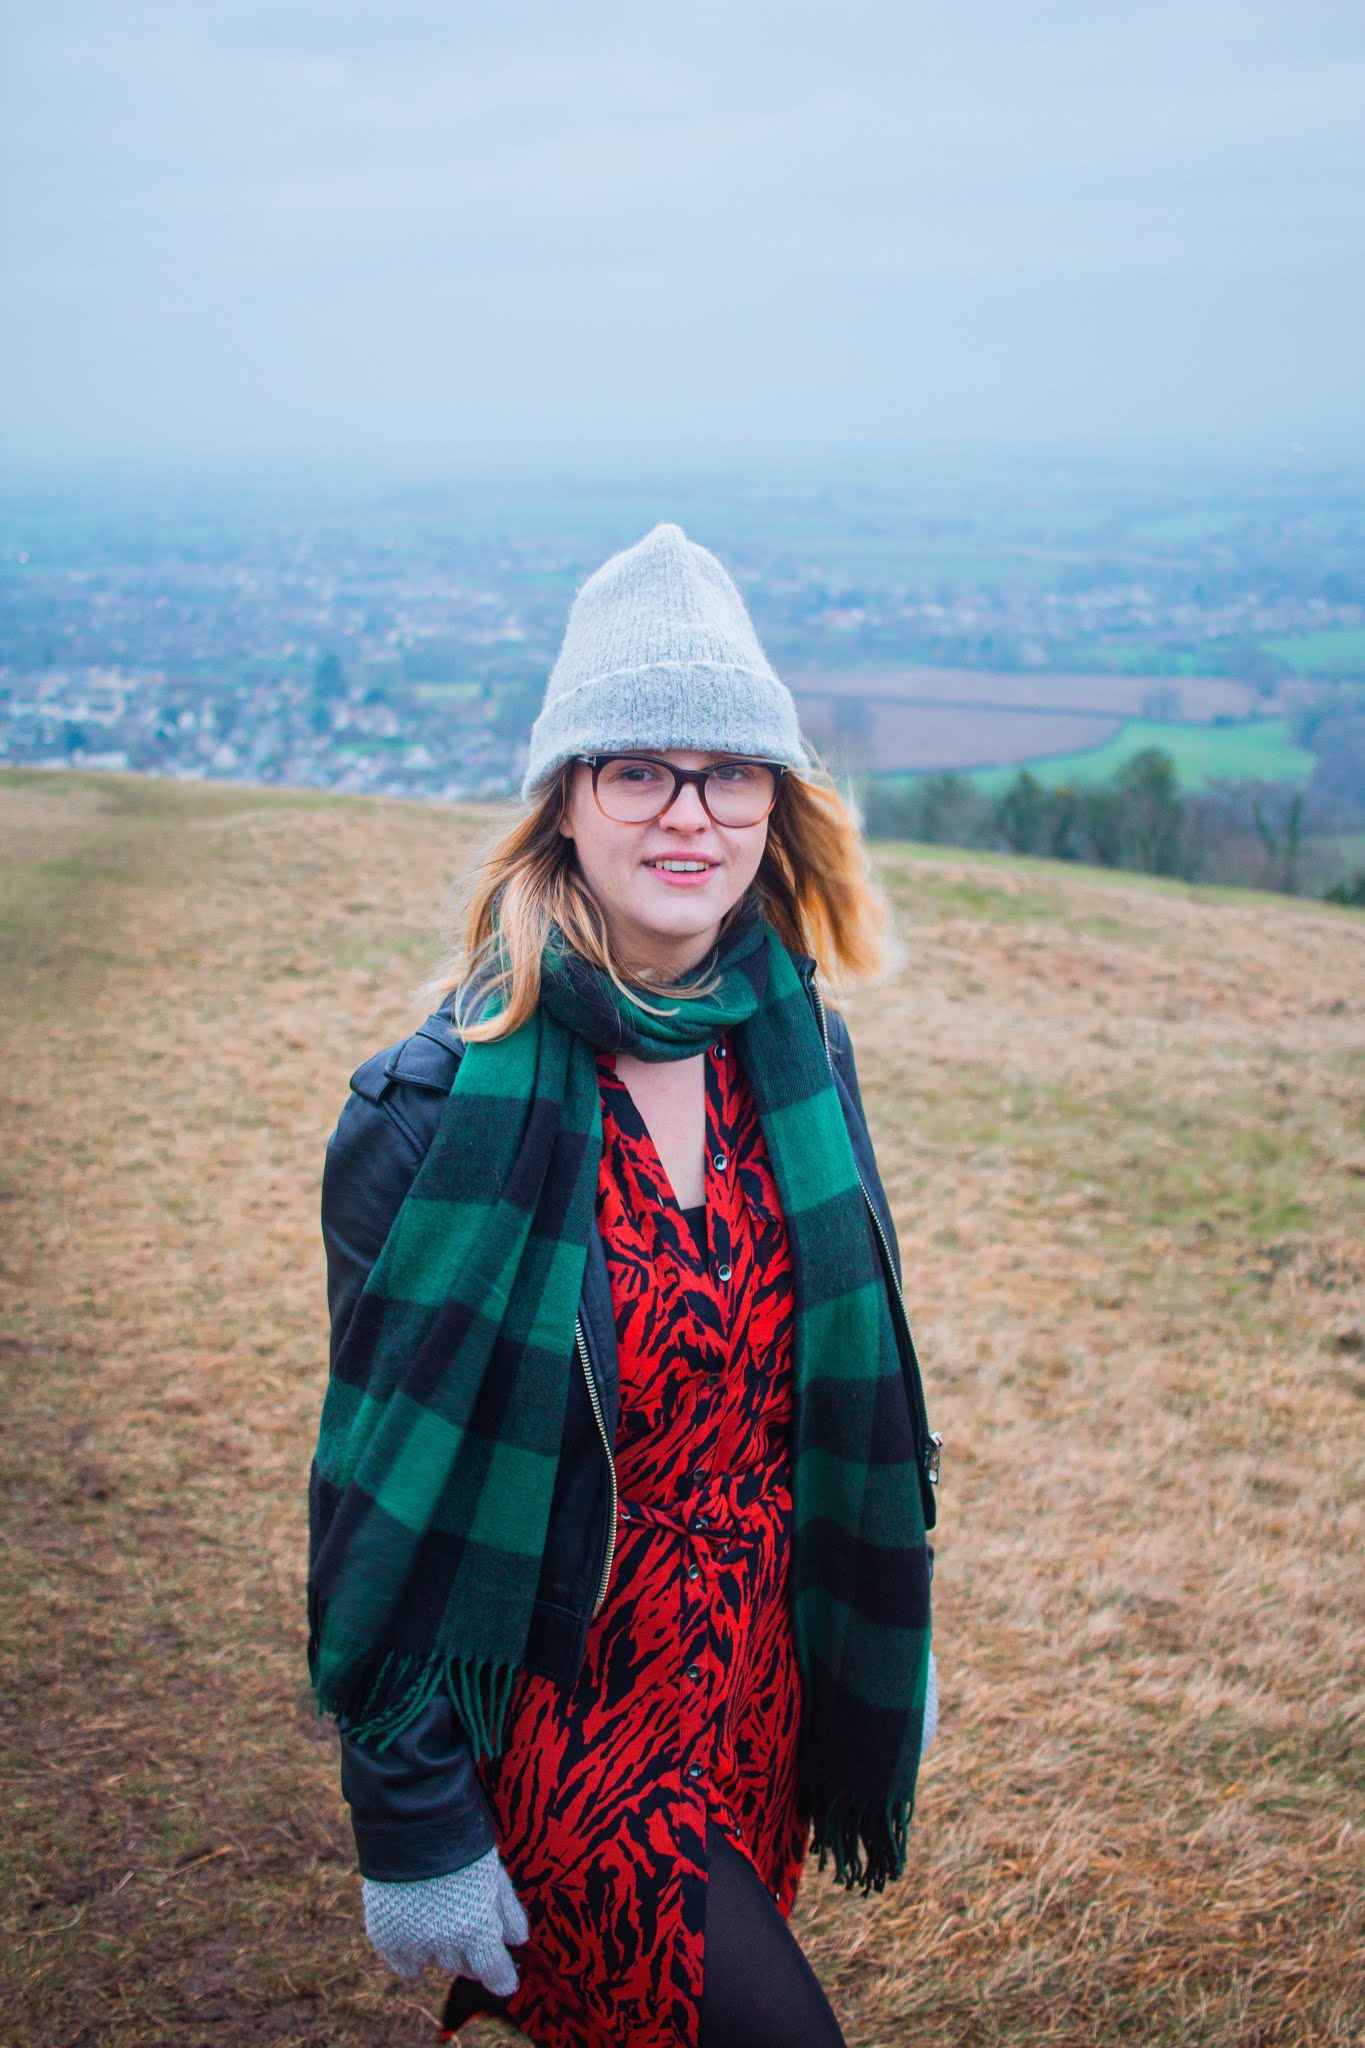 chloe harriets on walk in nature, scenic view, wearing mint velvet dress, whistle leatther jacket and beanie. 2020 bucket list